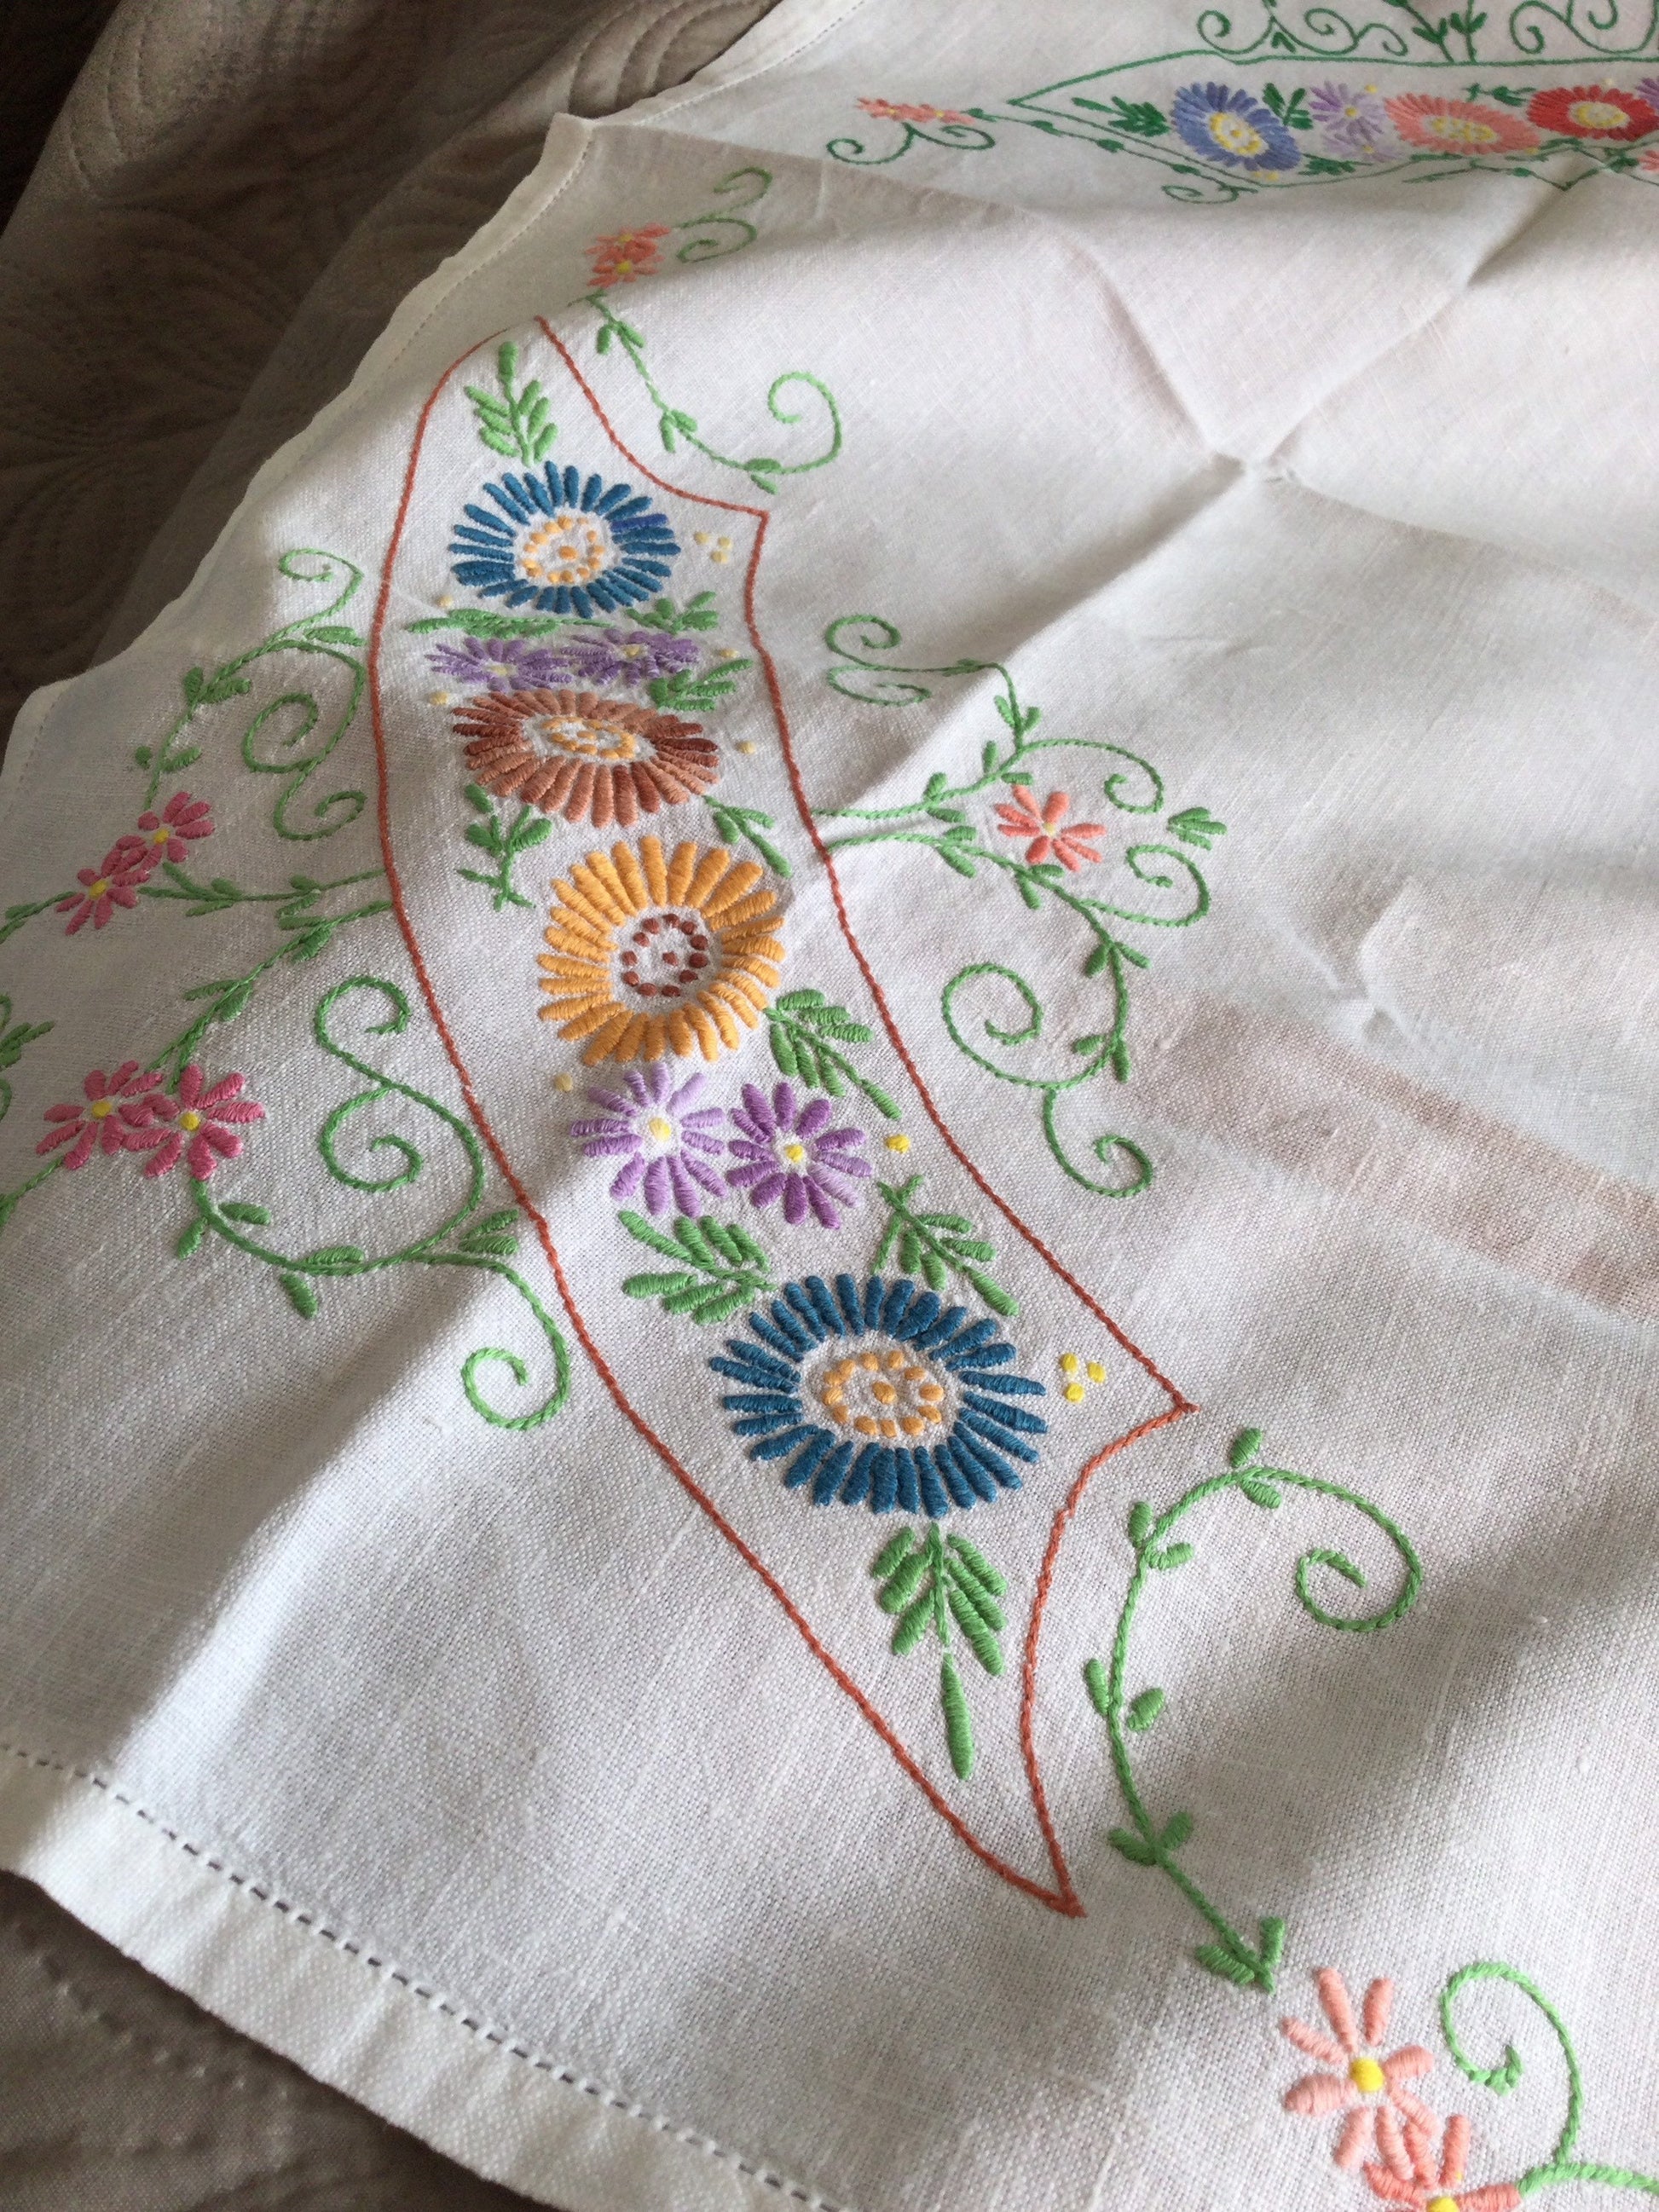 Large Antique vintage linen cotton table cloth off white square embroidered floral tablecloth blue pink embroidery flowers cottage chateau